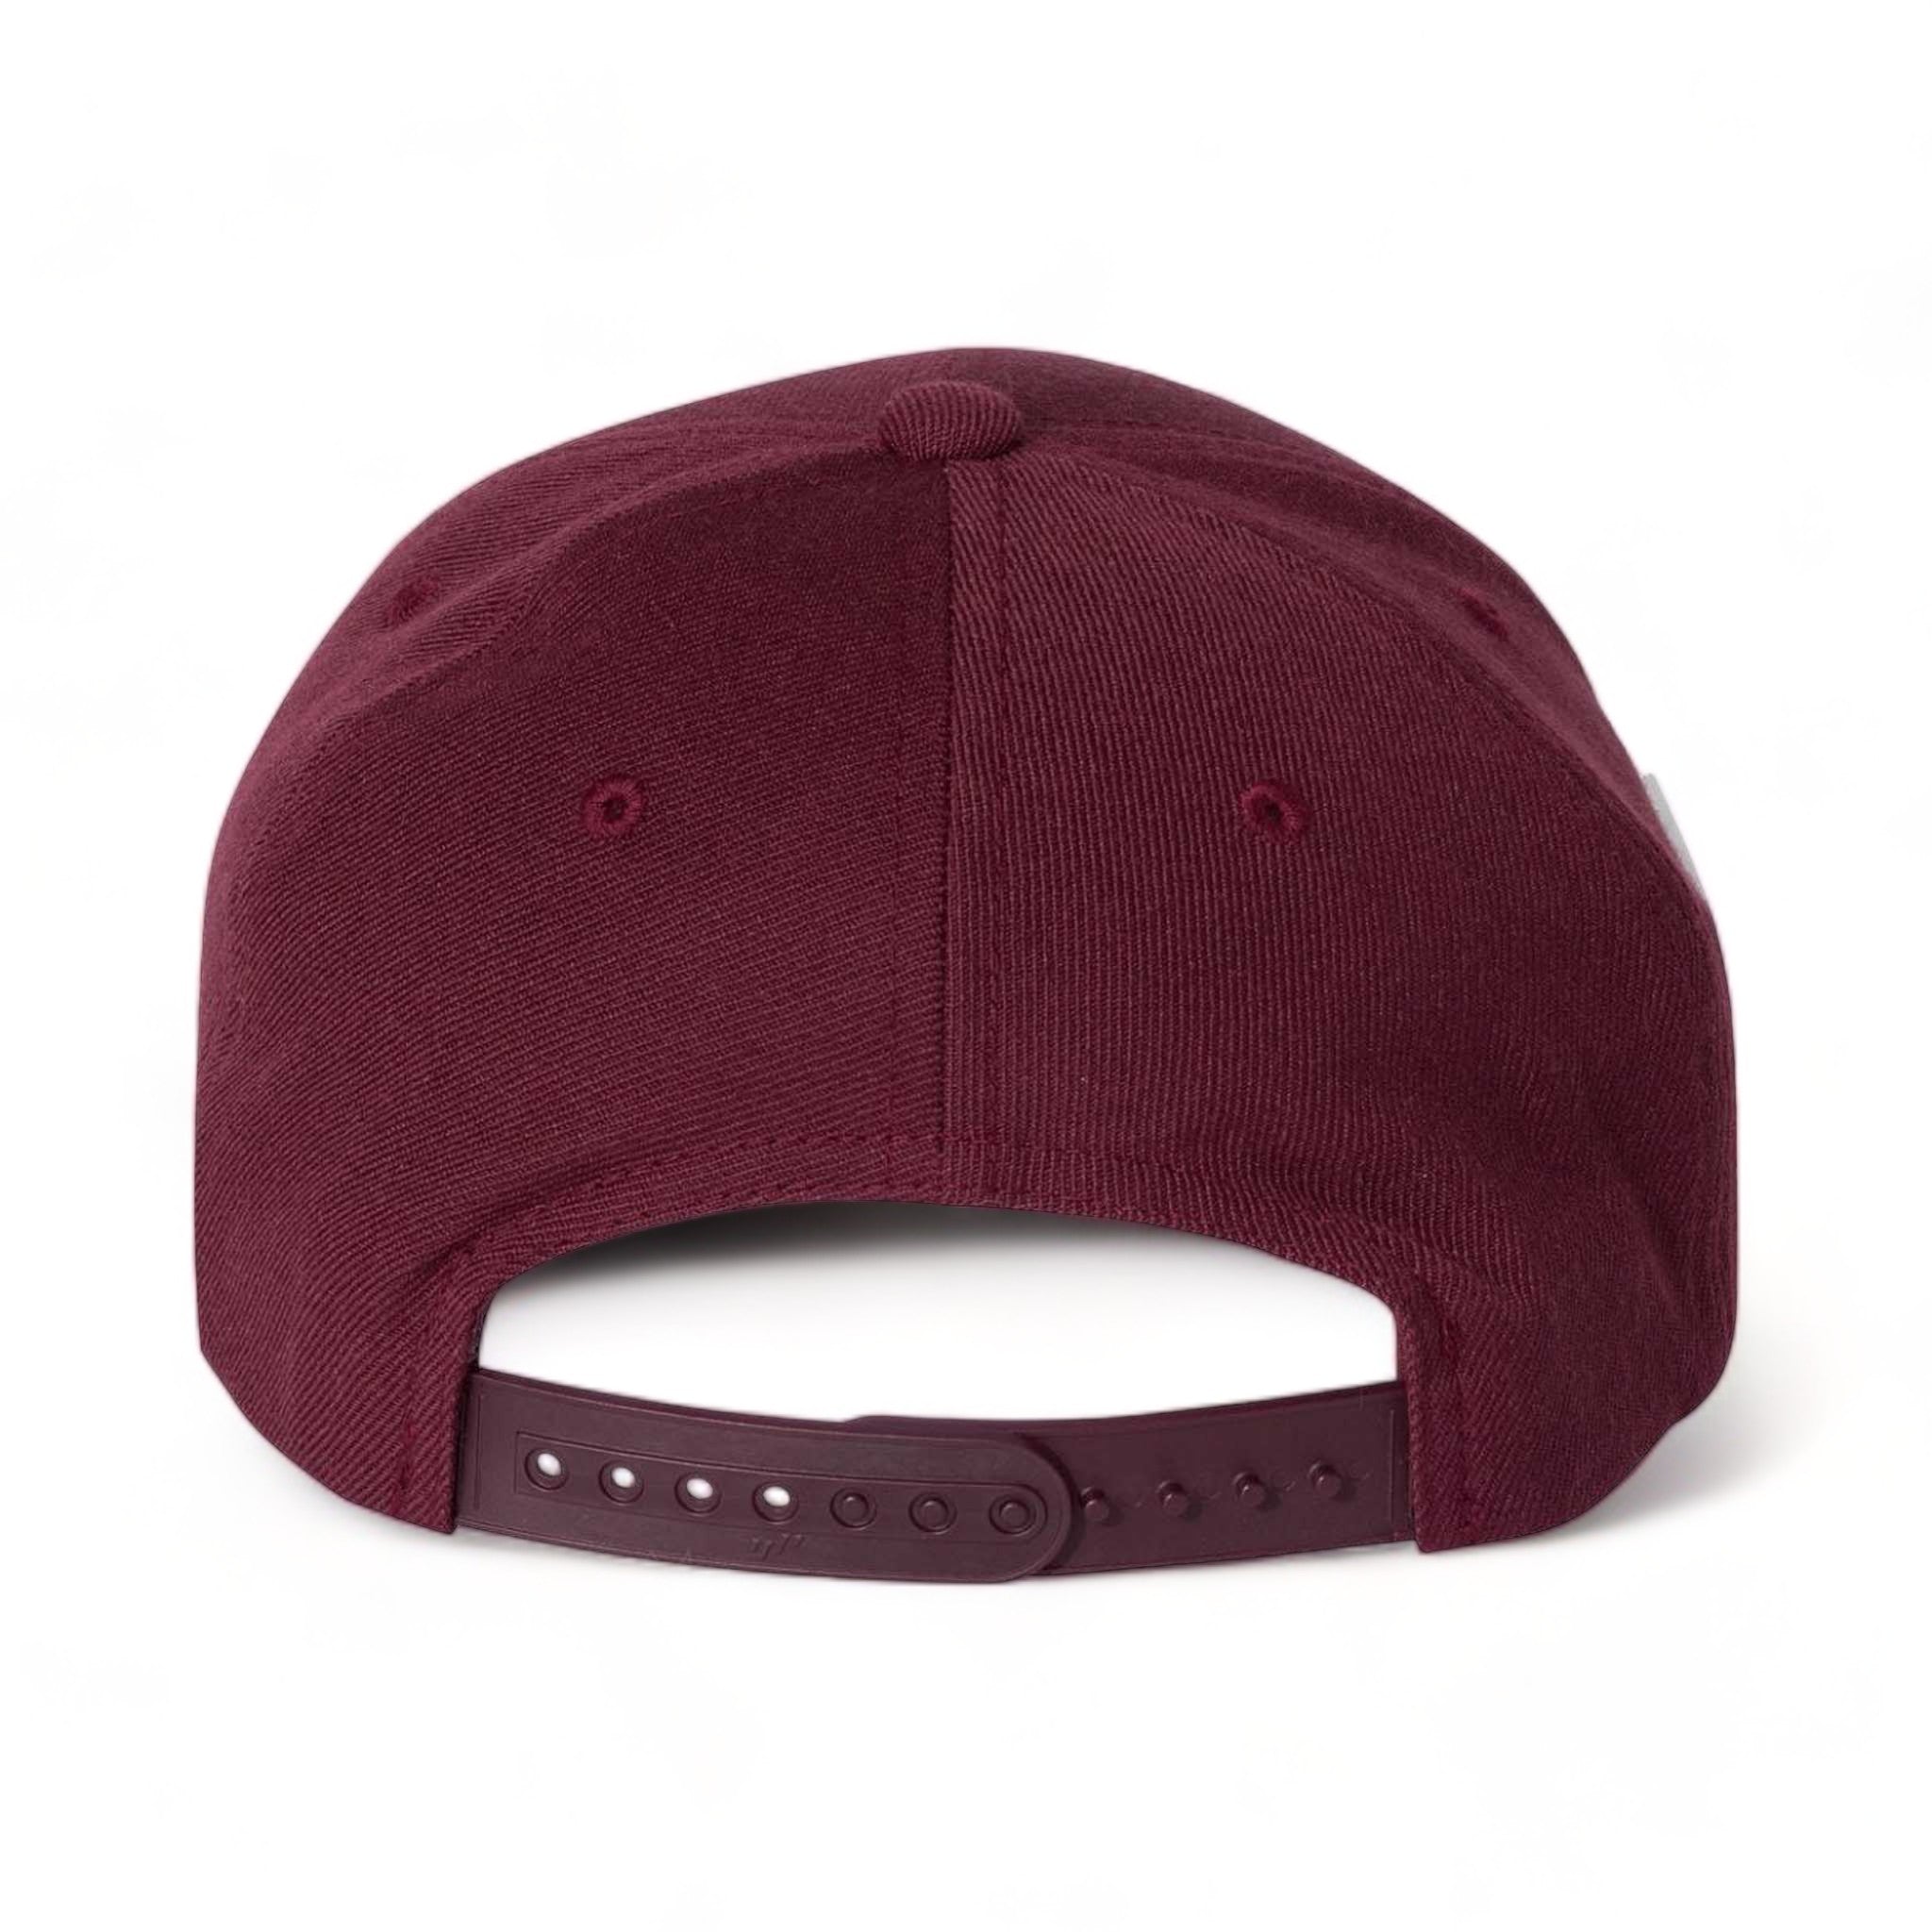 Back view of YP Classics 6789M custom hat in maroon